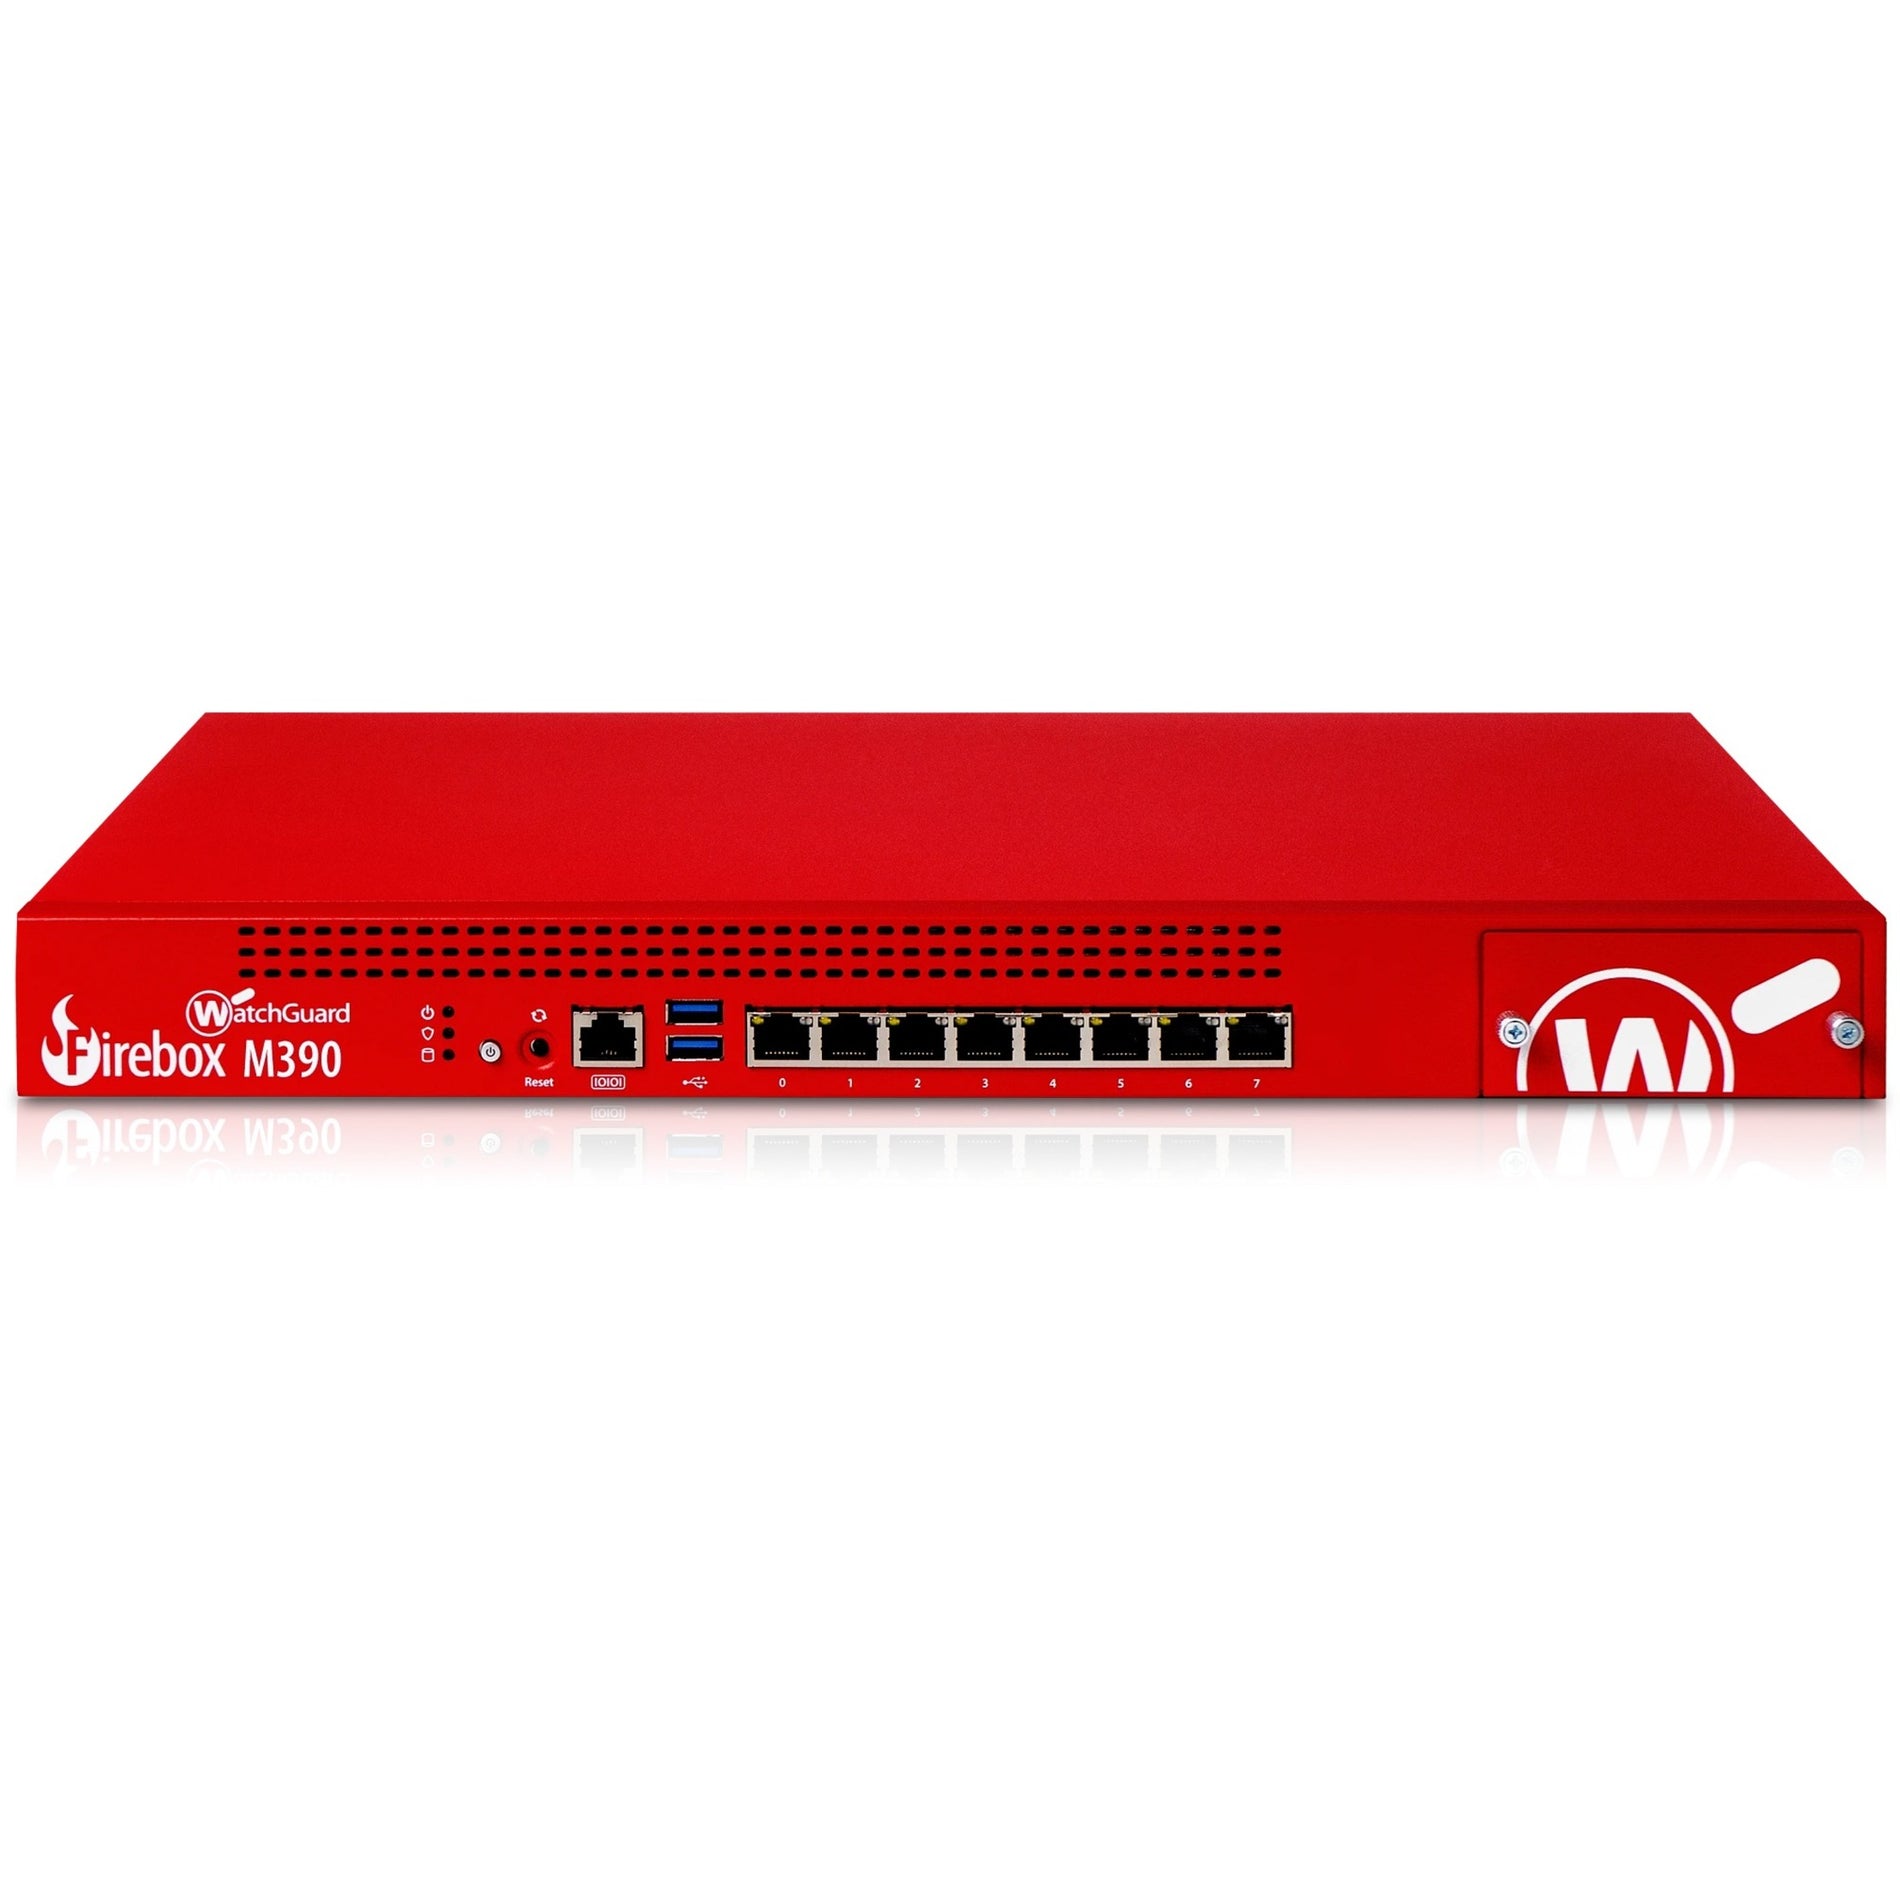 WatchGuard WGM39000801 Firebox M390 Network Security/Firewall Appliance, 8 Ports, 1 Year Total Security Suite